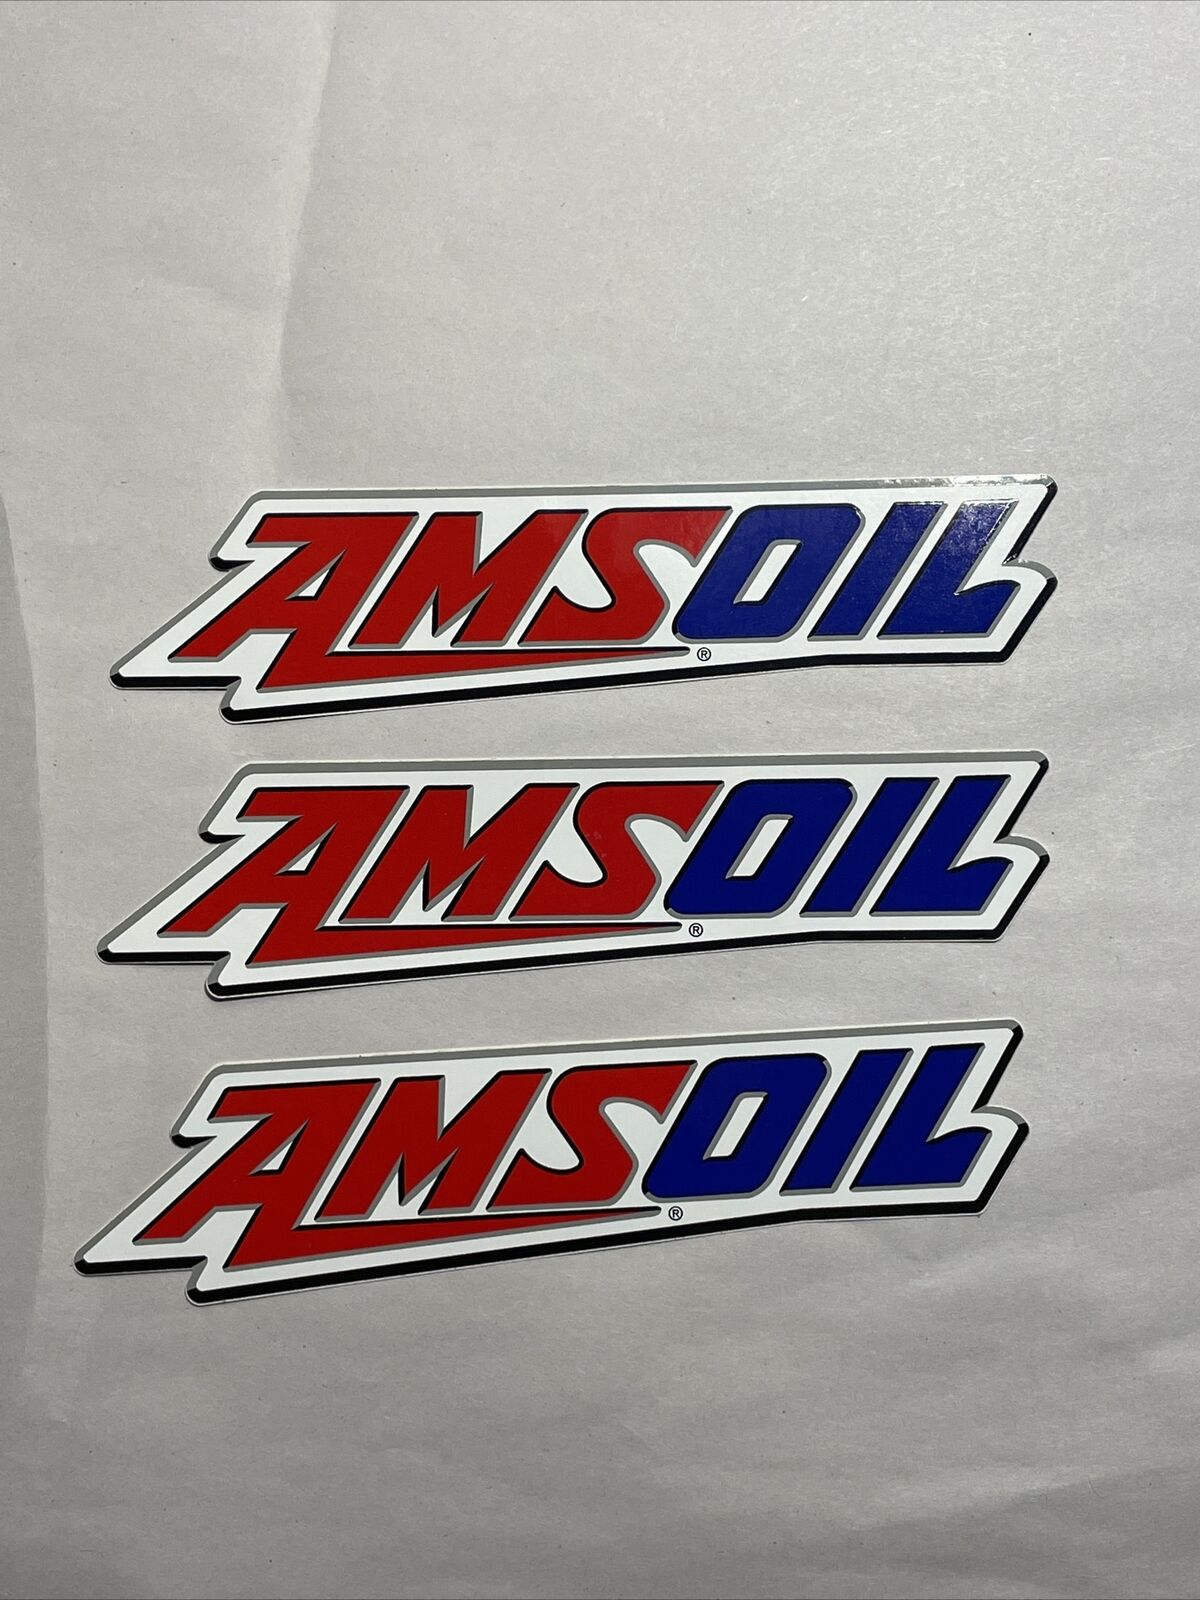 AMSOIL Decal Stickers Qty 3 8" Length